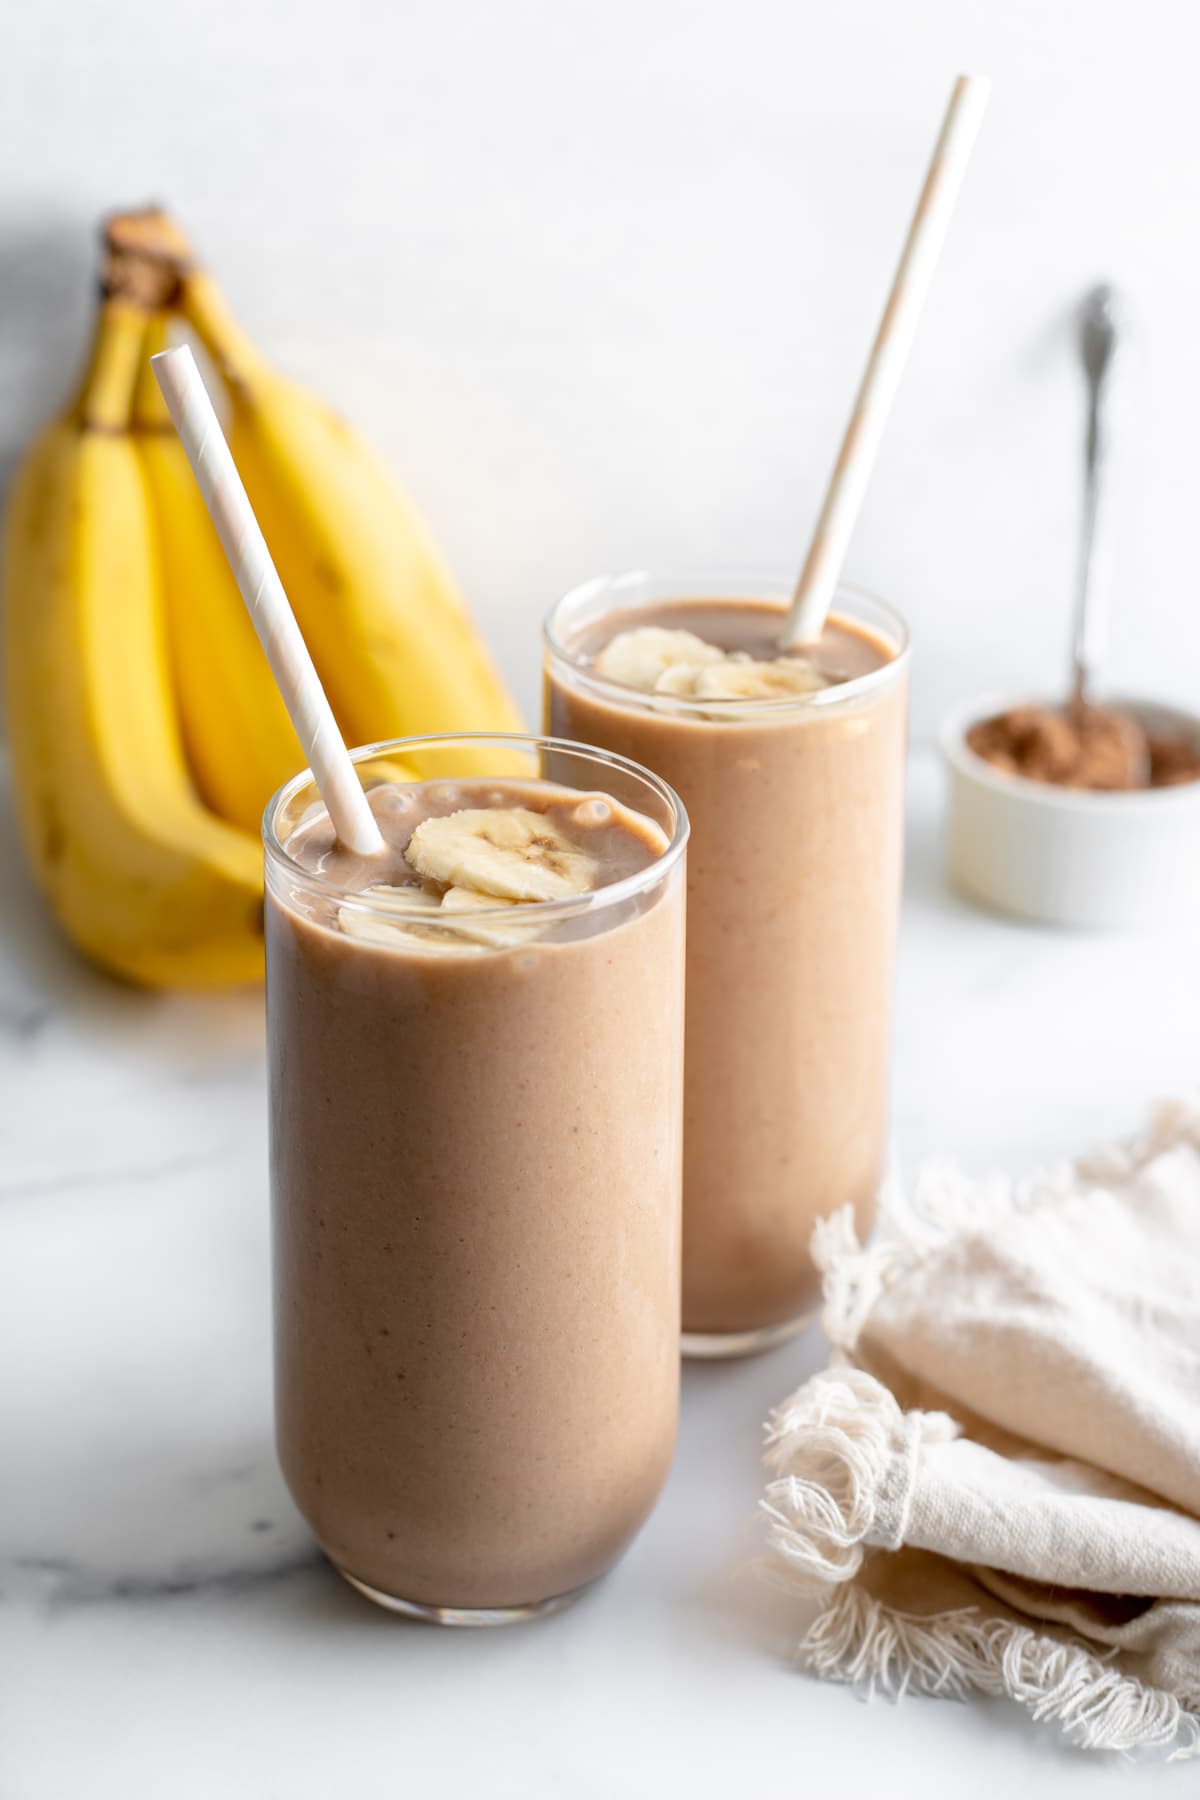 Two glasses of chocolate banana smoothie in front of a bunch of bananas